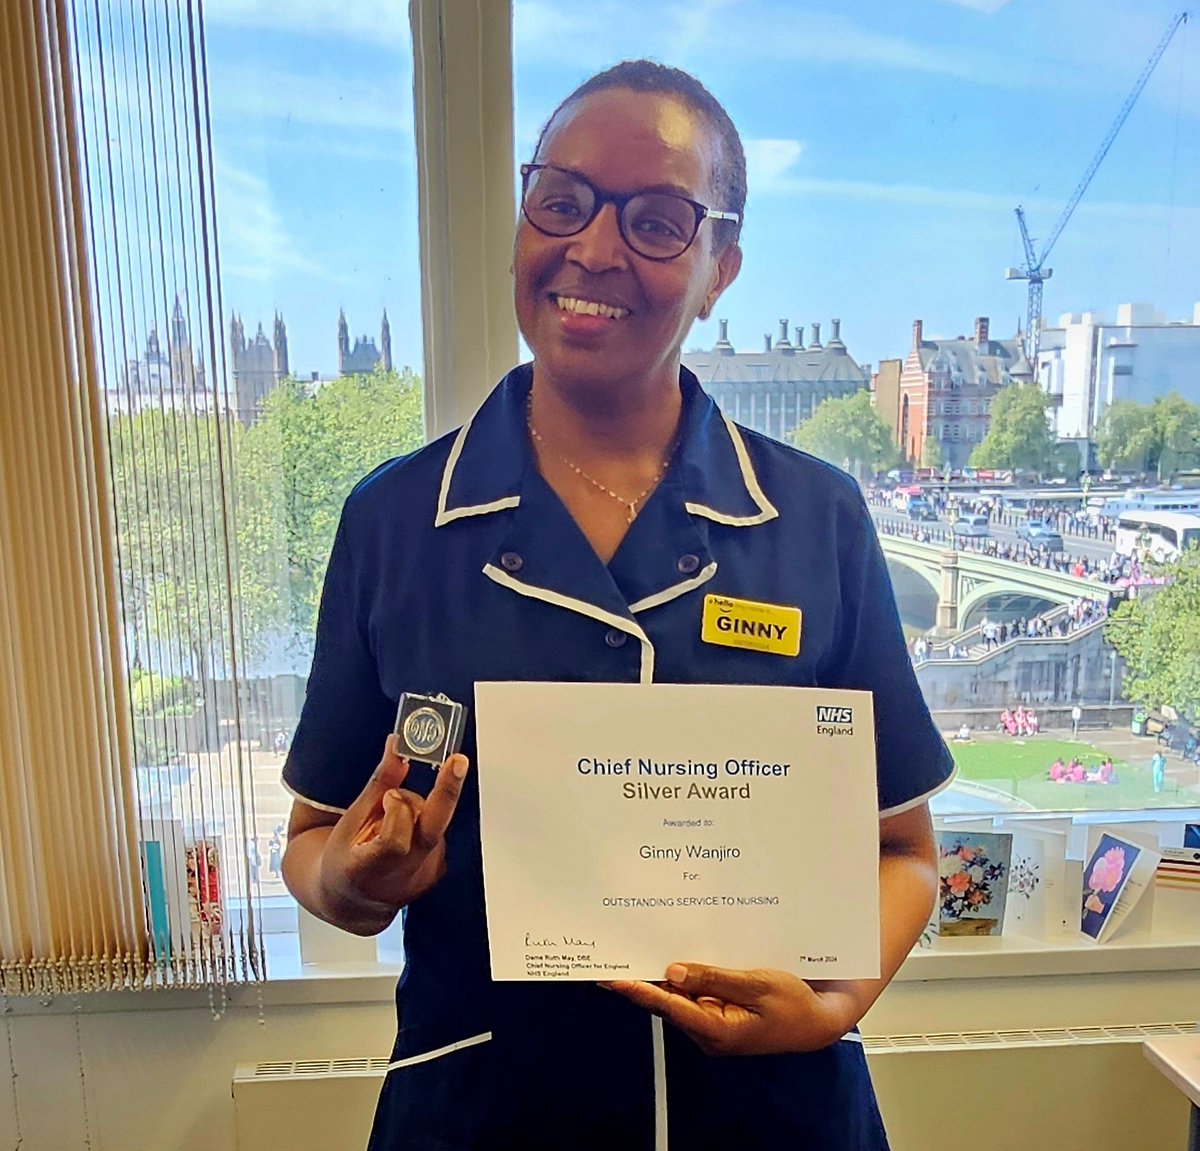 Congratulations to intensive care Sister Ginny Wanjiro, who won a prestigious silver Chief Nursing Officer Award by @CNOEngland Ginny was recognised for her hair and skincare initiative to care for our ICU patients. This successful project has interest from across the UK. 1/2